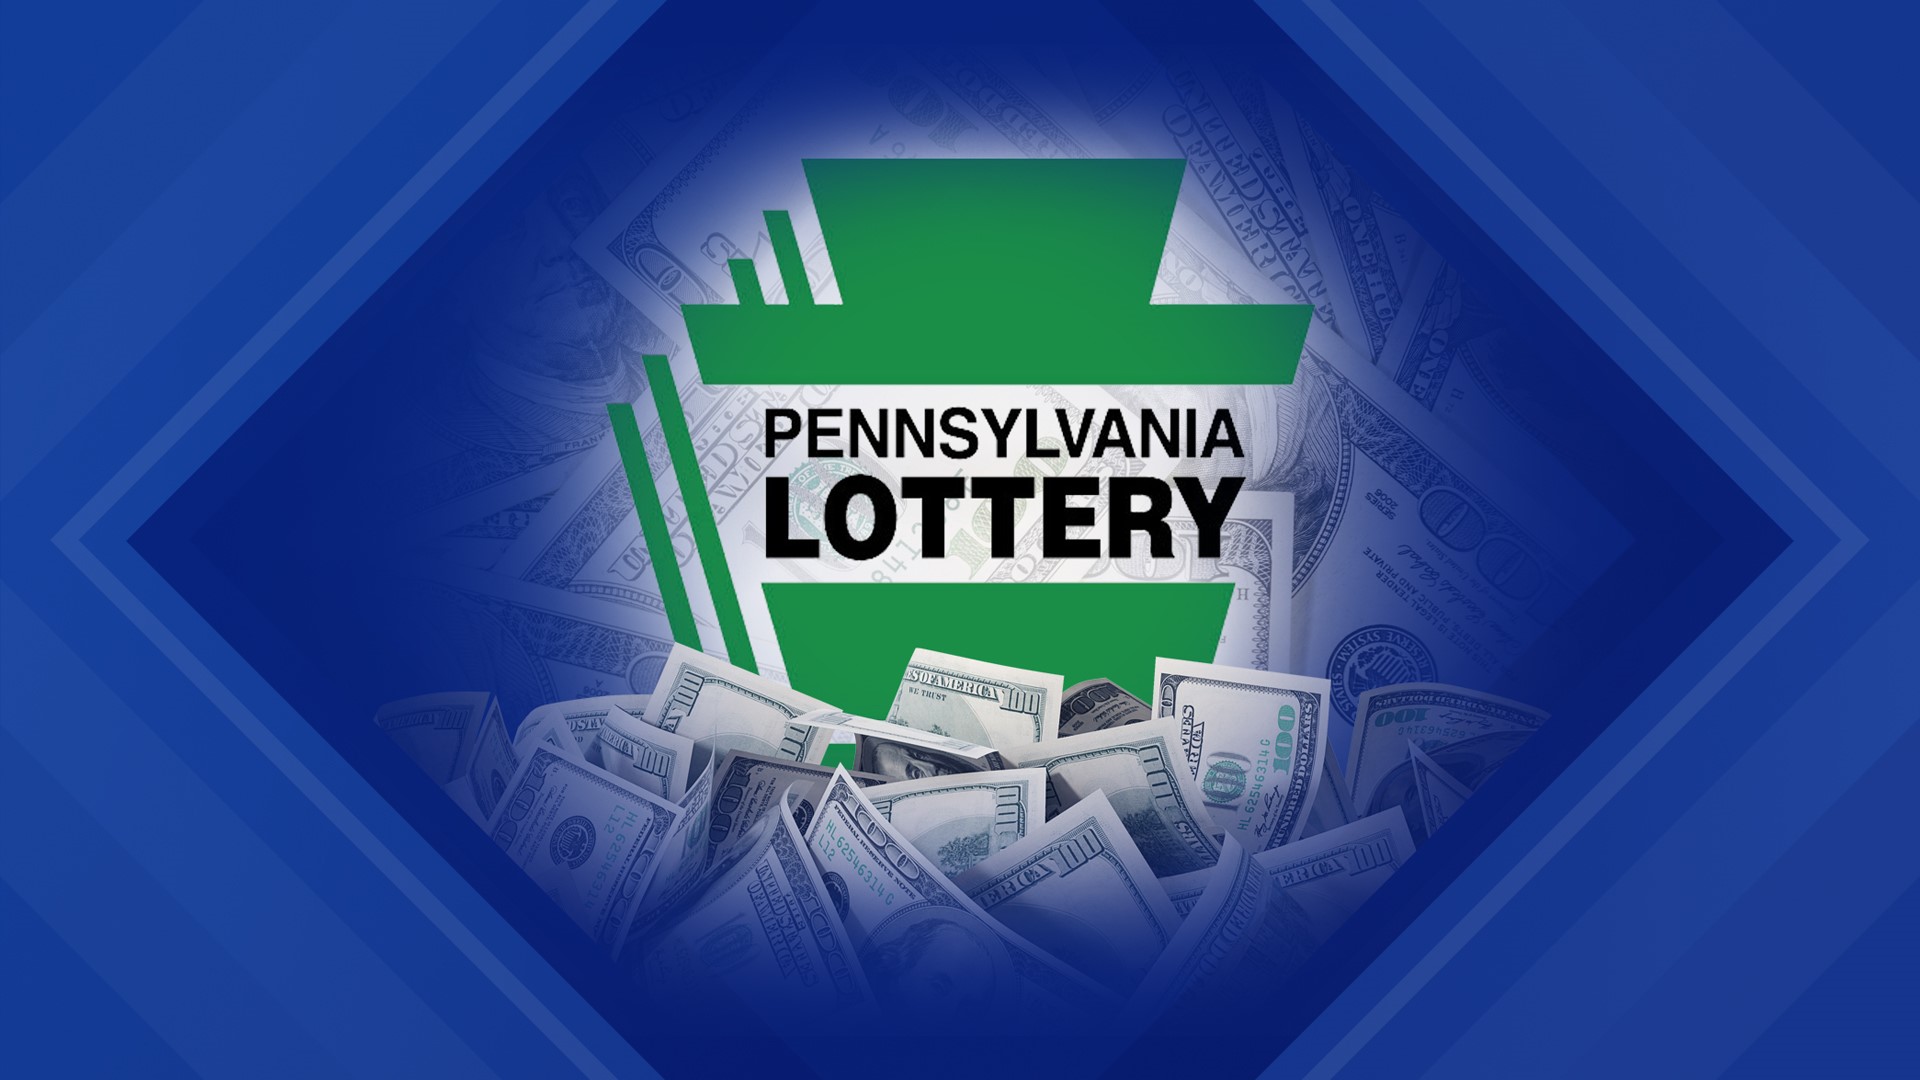 The big winner was sold at the Wawa store on Milford Road in East Stroudsburg.